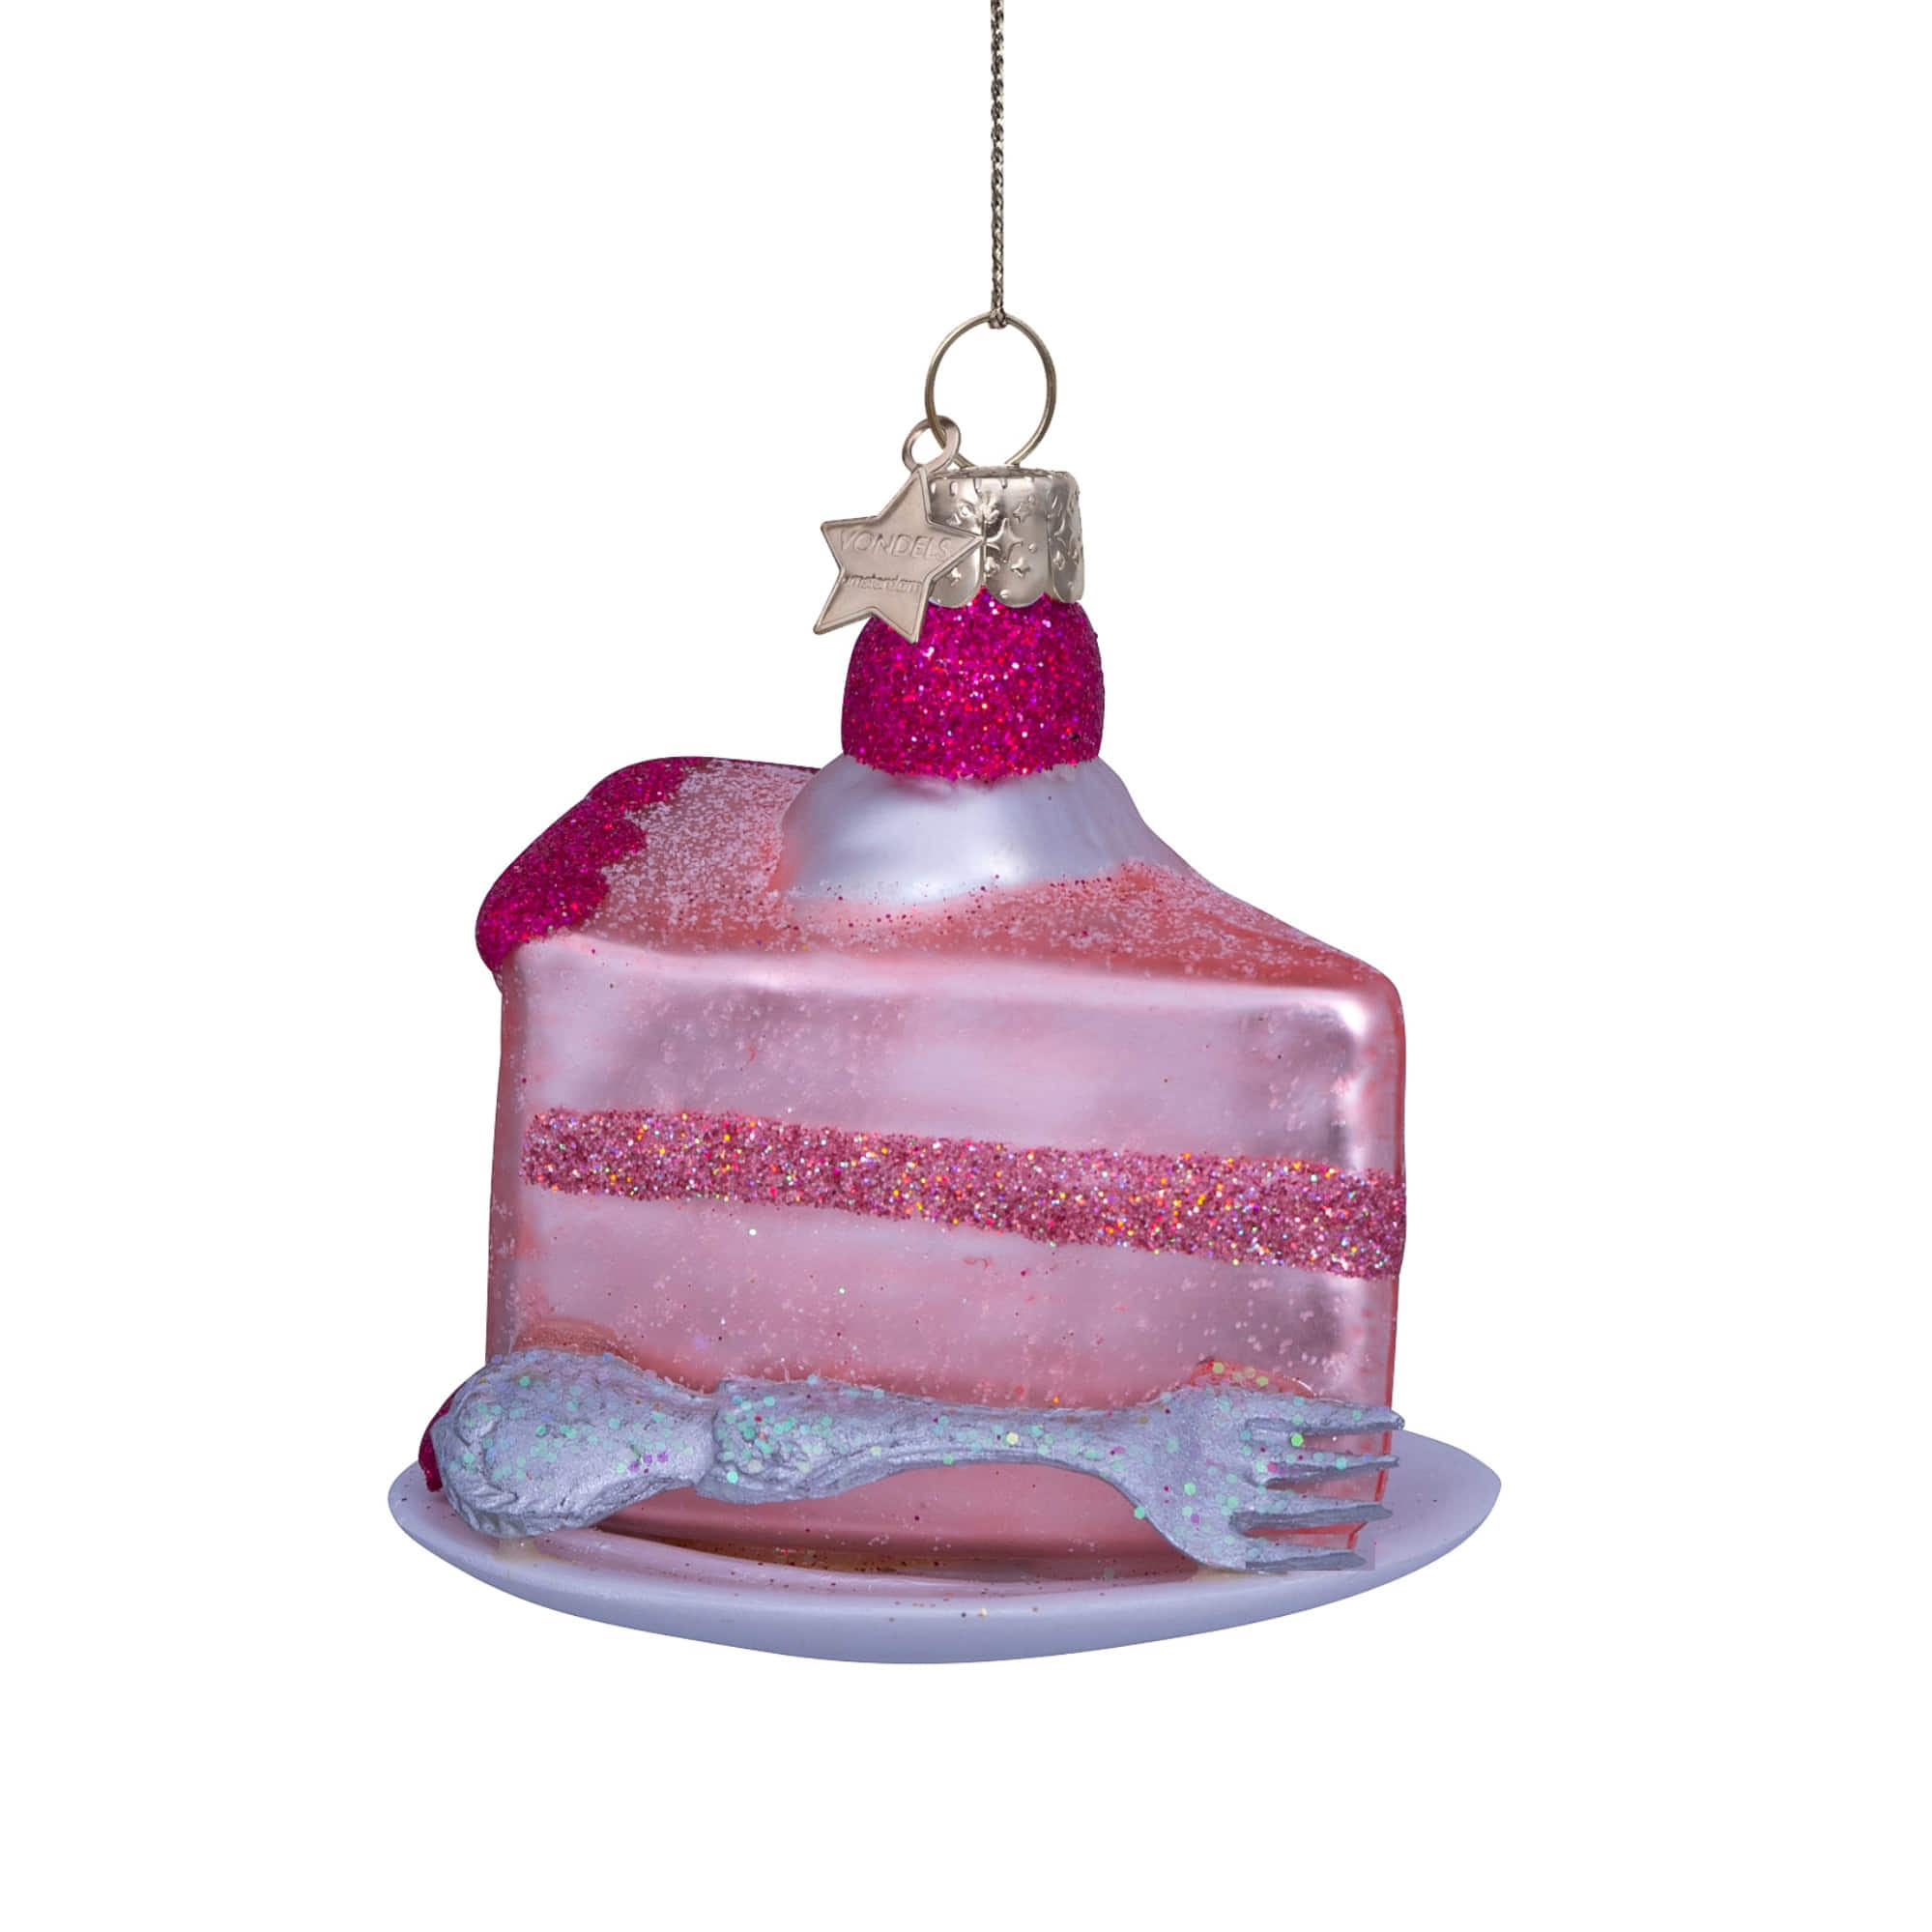 VONDELS Ornament Glass Pink Cake with Silver Fork